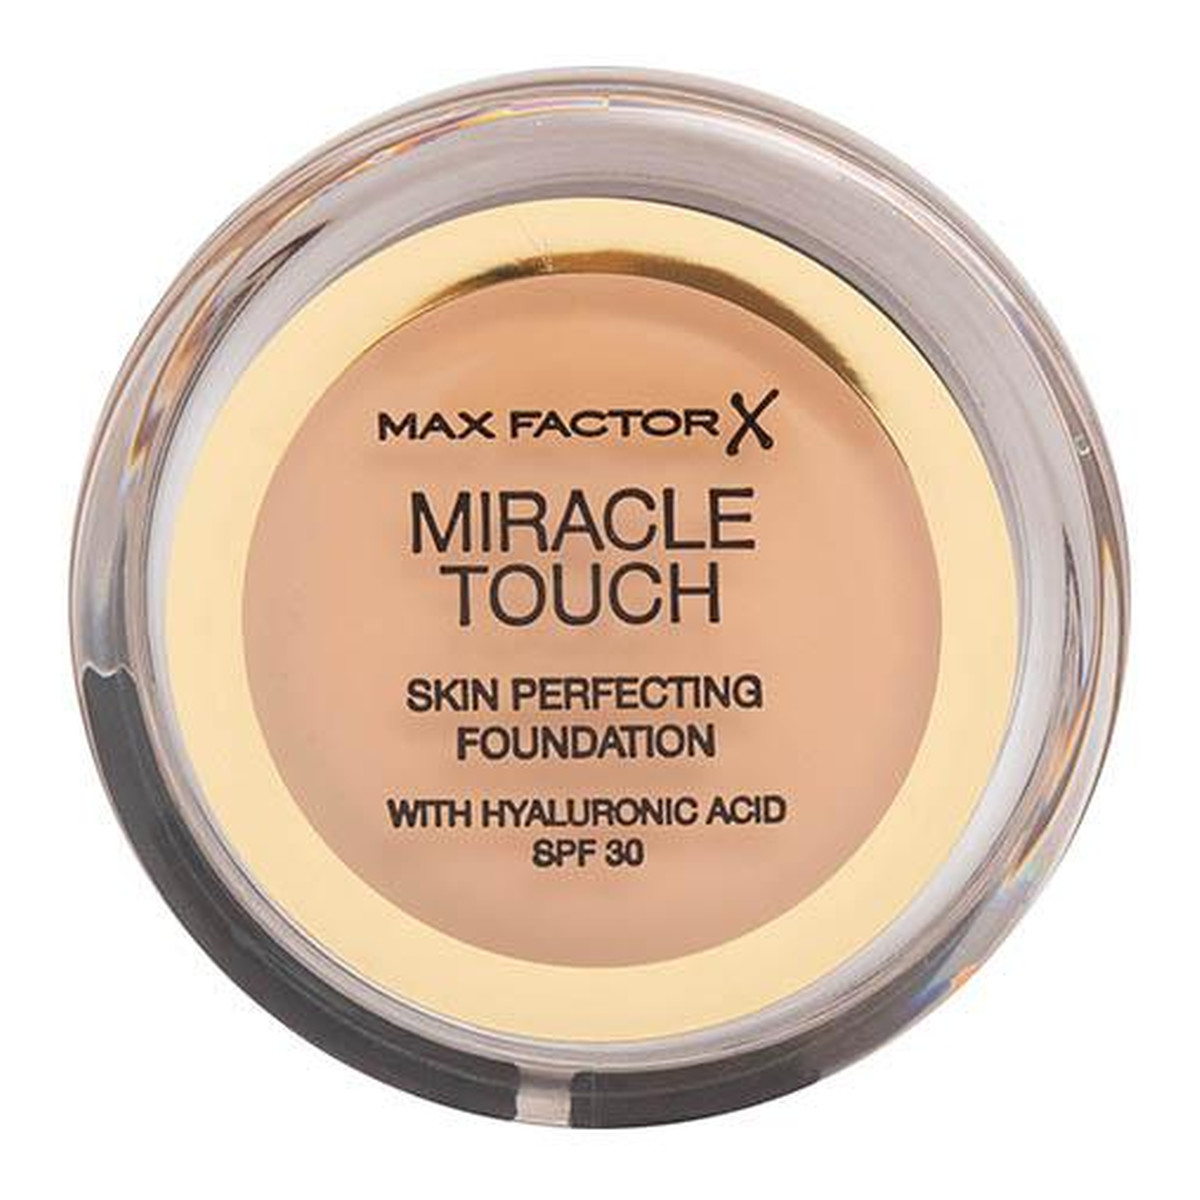 Max Factor Miracle Touch Podkład 11g